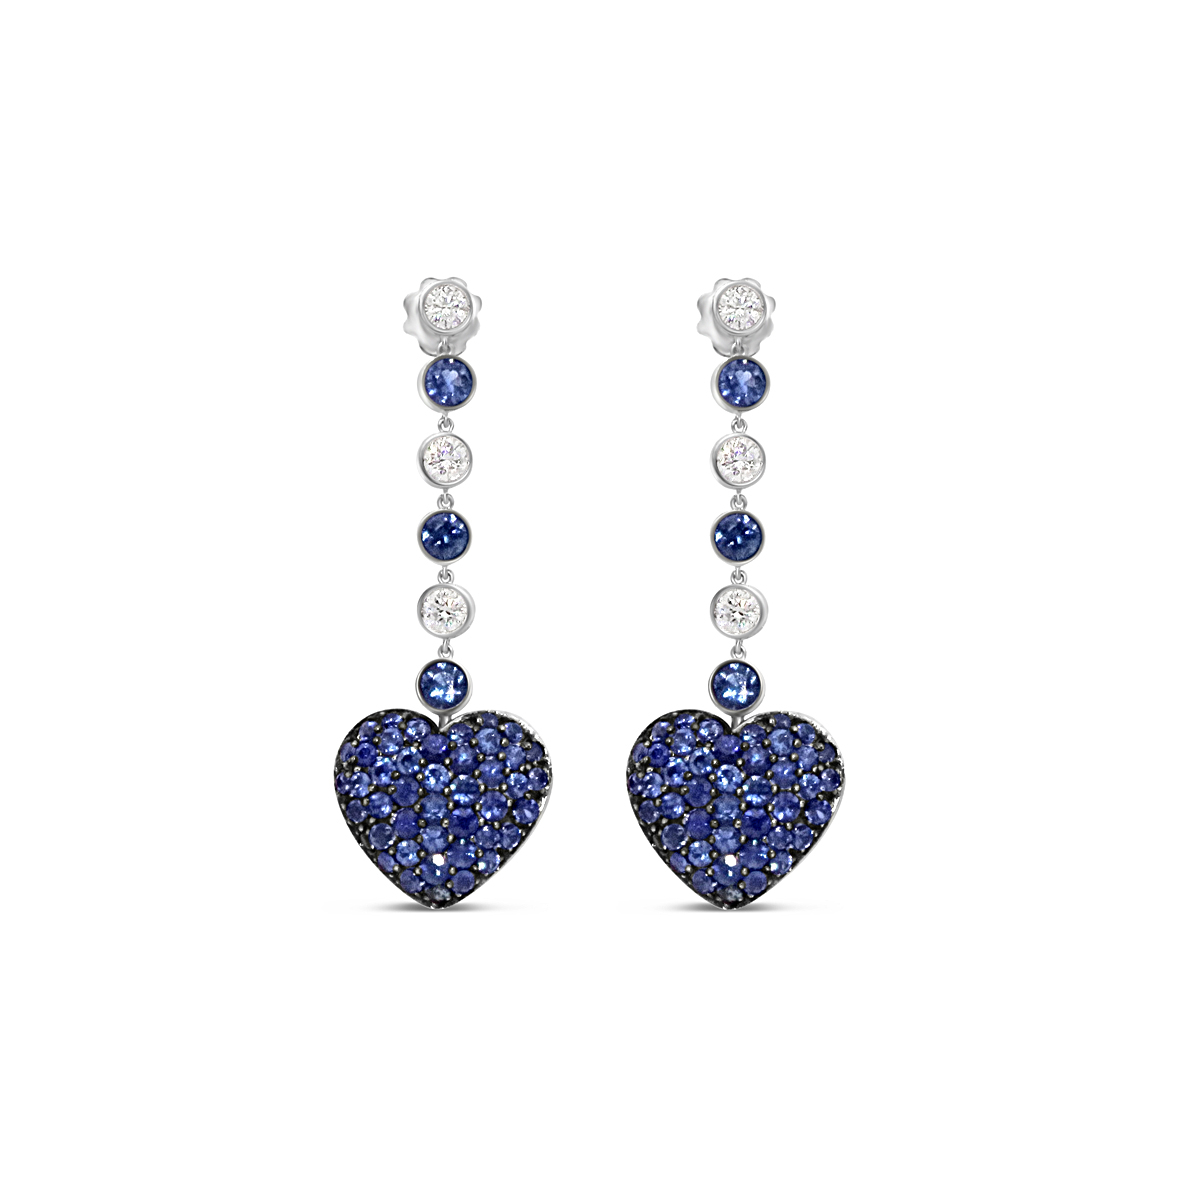 Reversible 18 K White Gold Heart Earrings with Blue Sapphires and Diamonds 